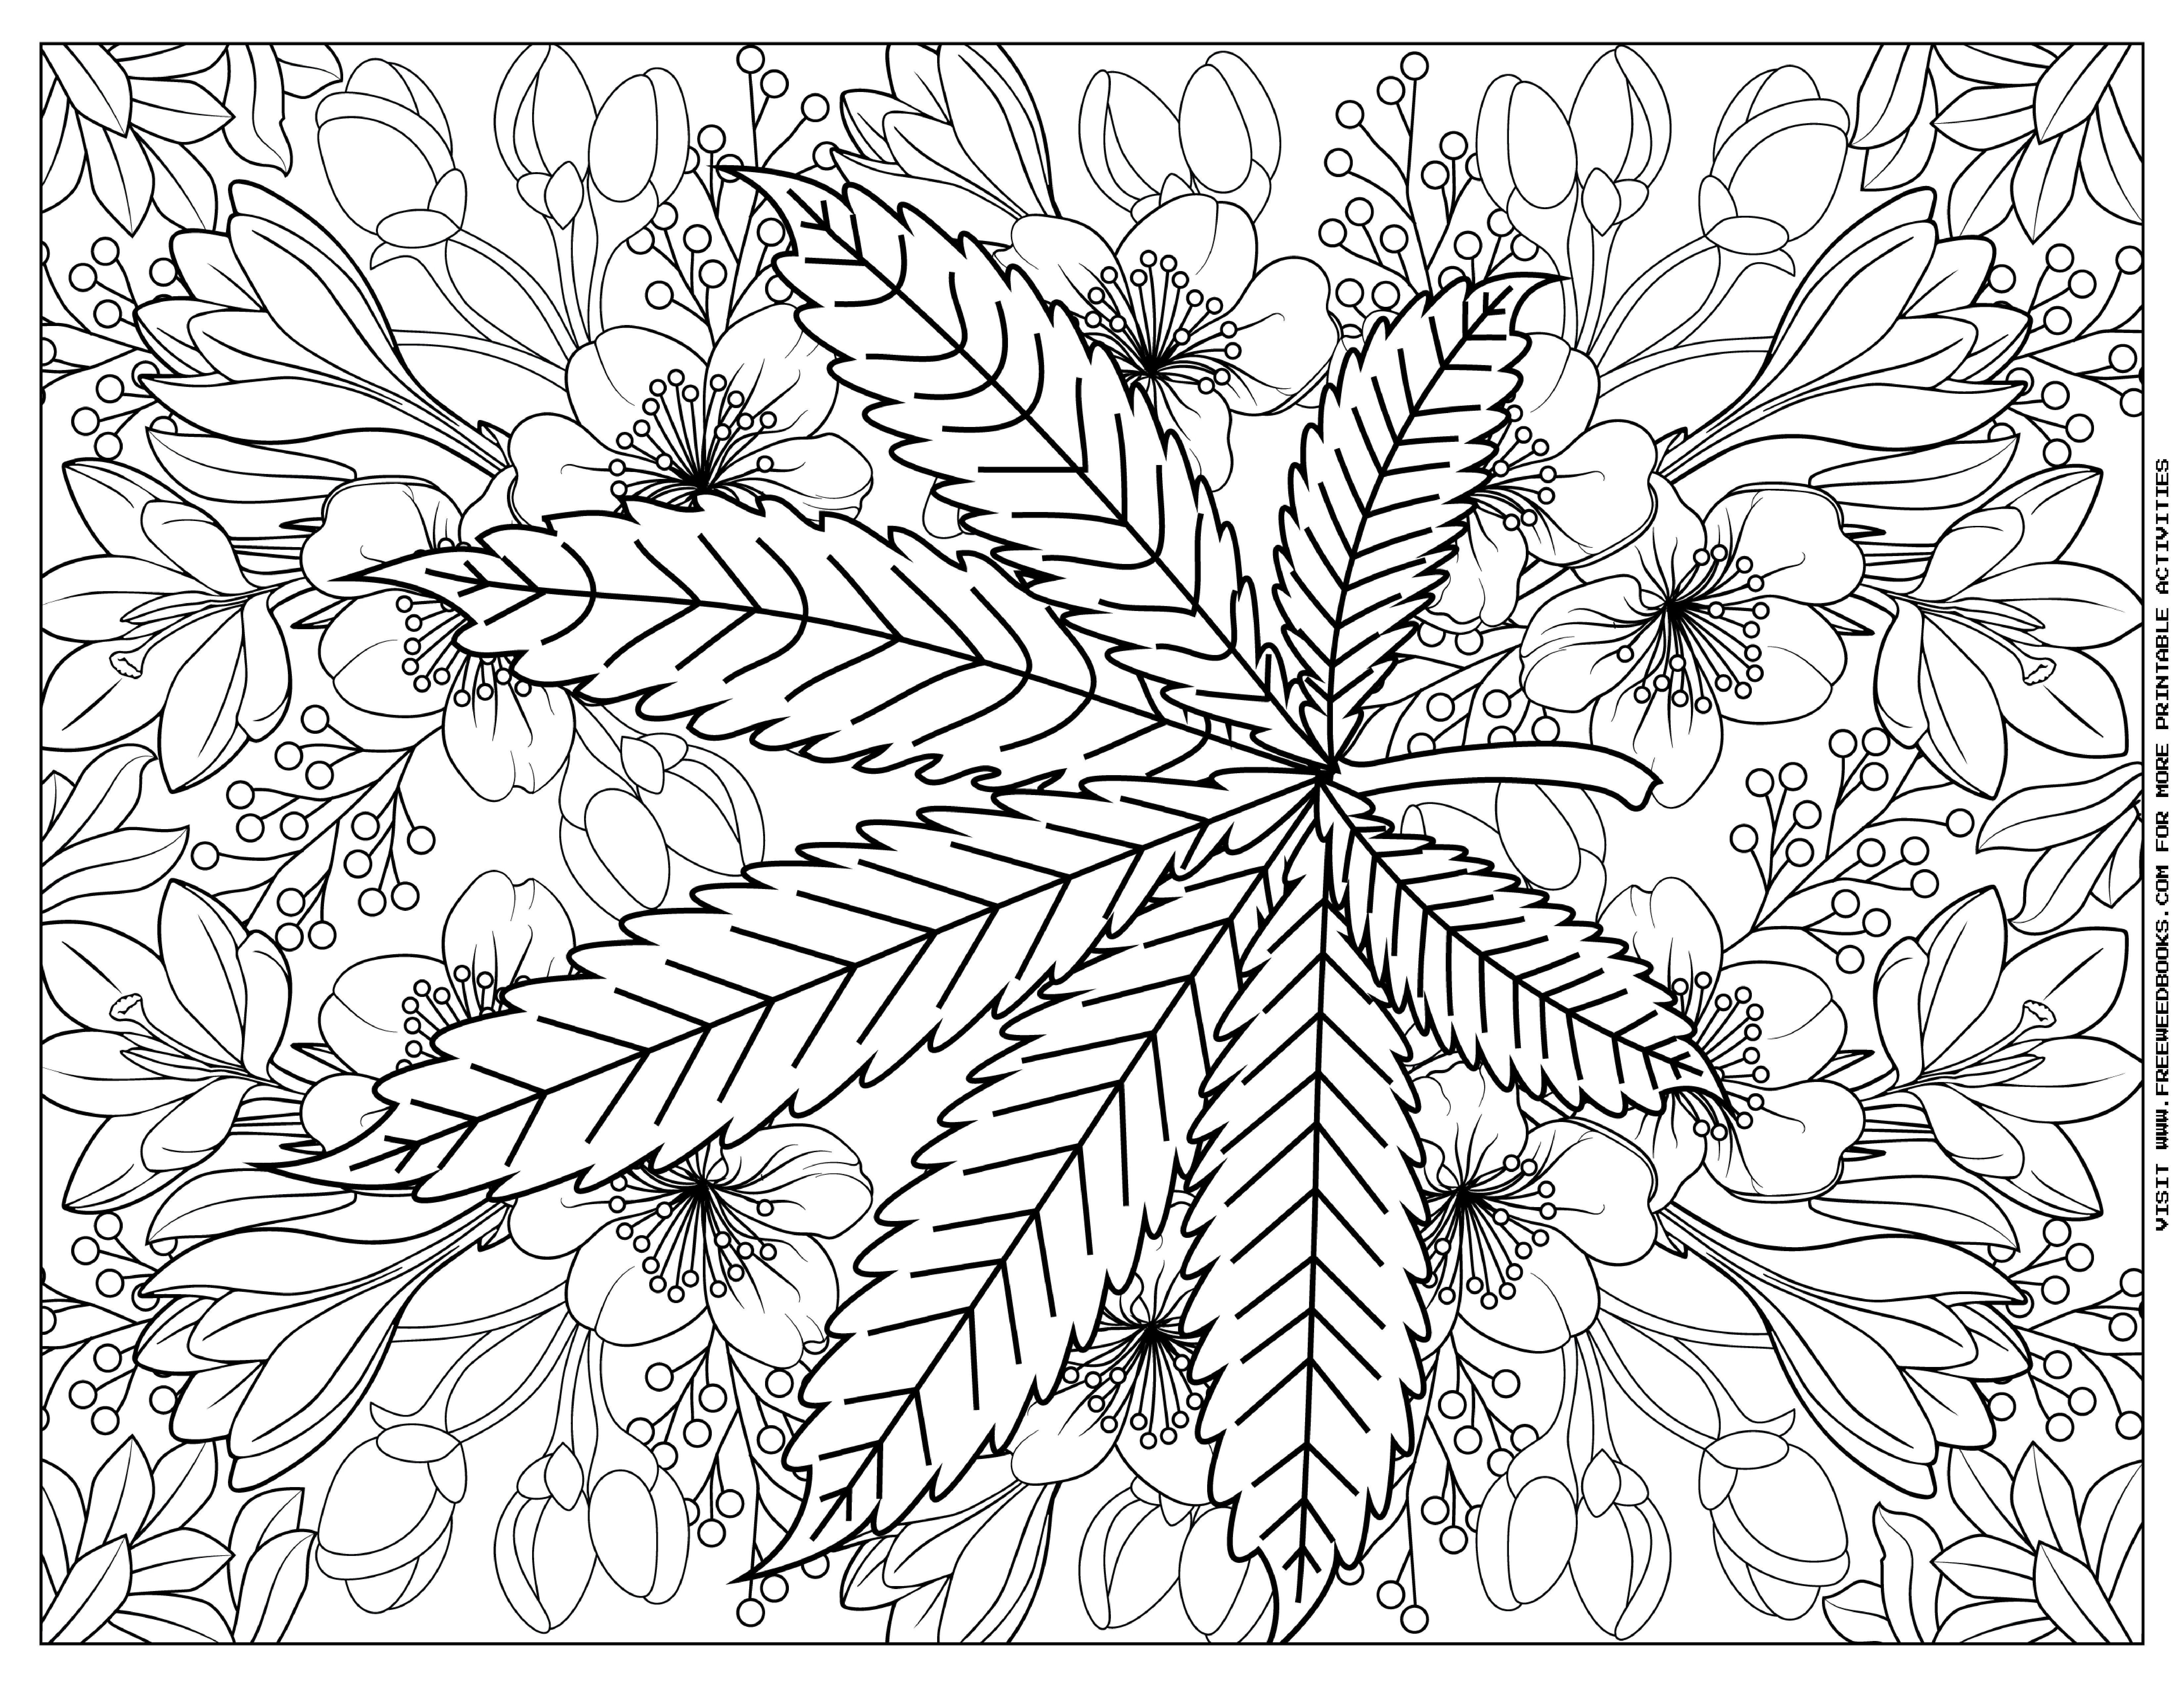 Coloring pages â free weed books